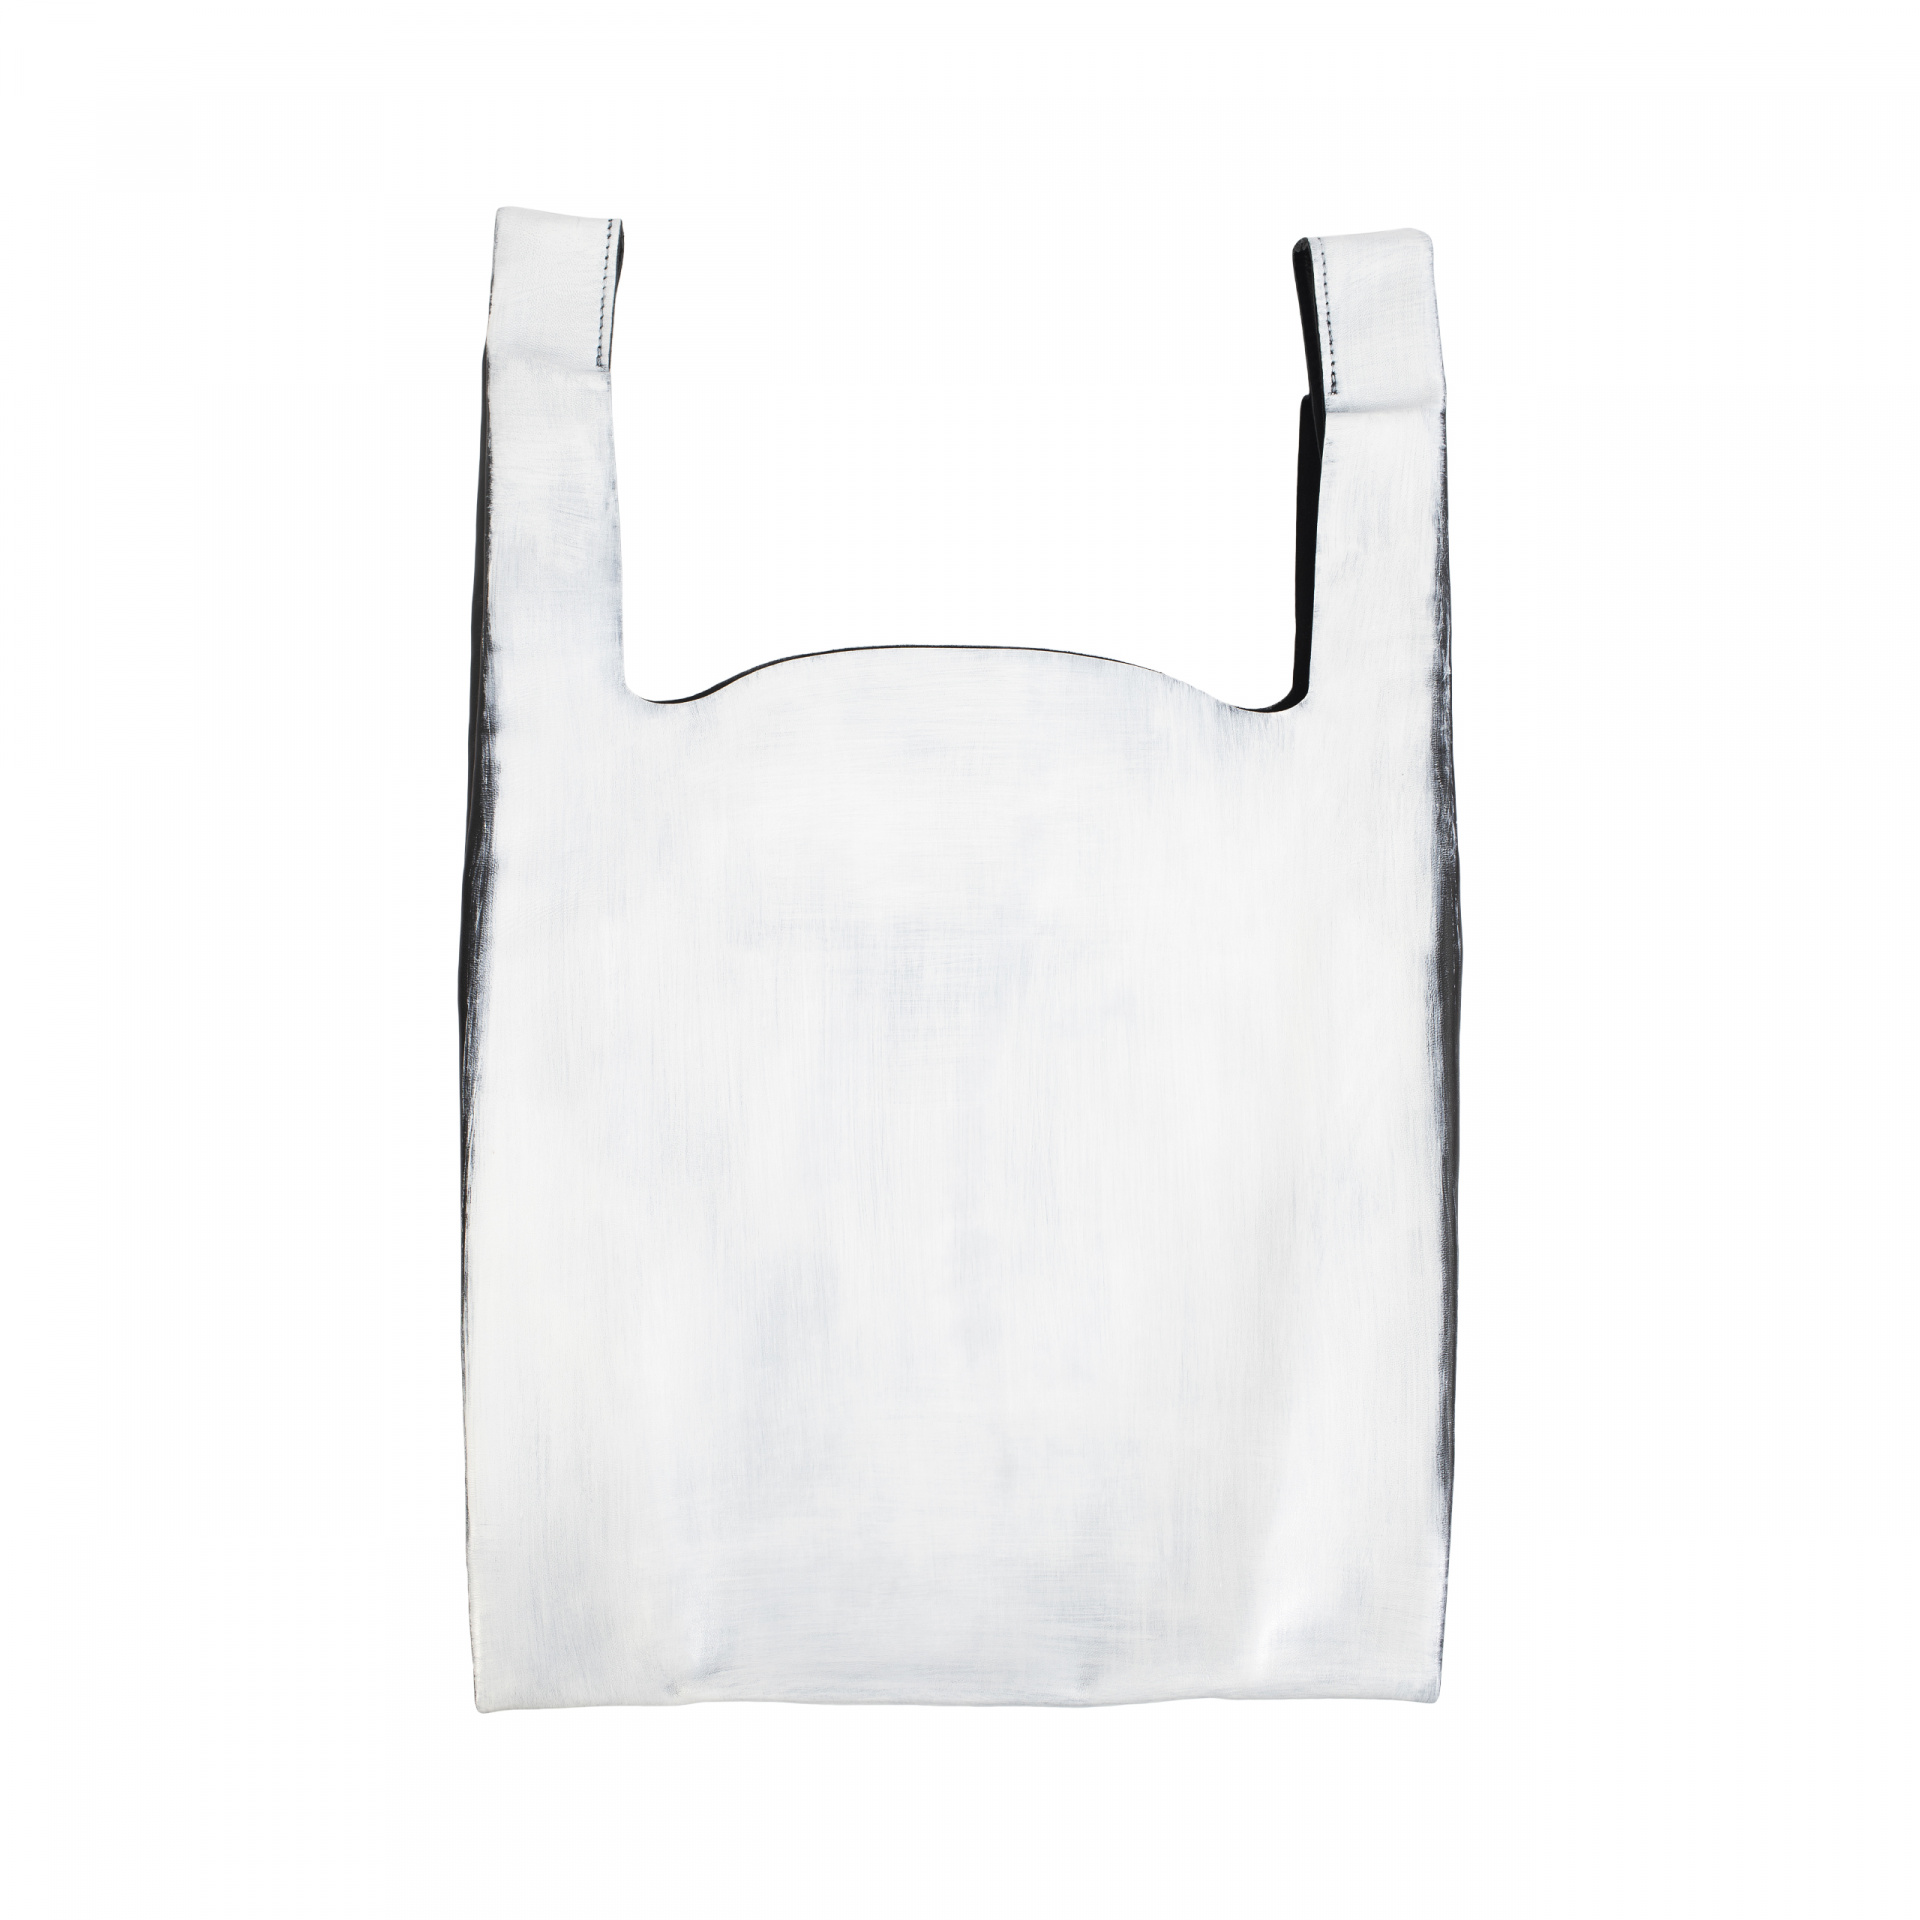 Maison Margiela Bianchetto Painted Leather Tote Bag